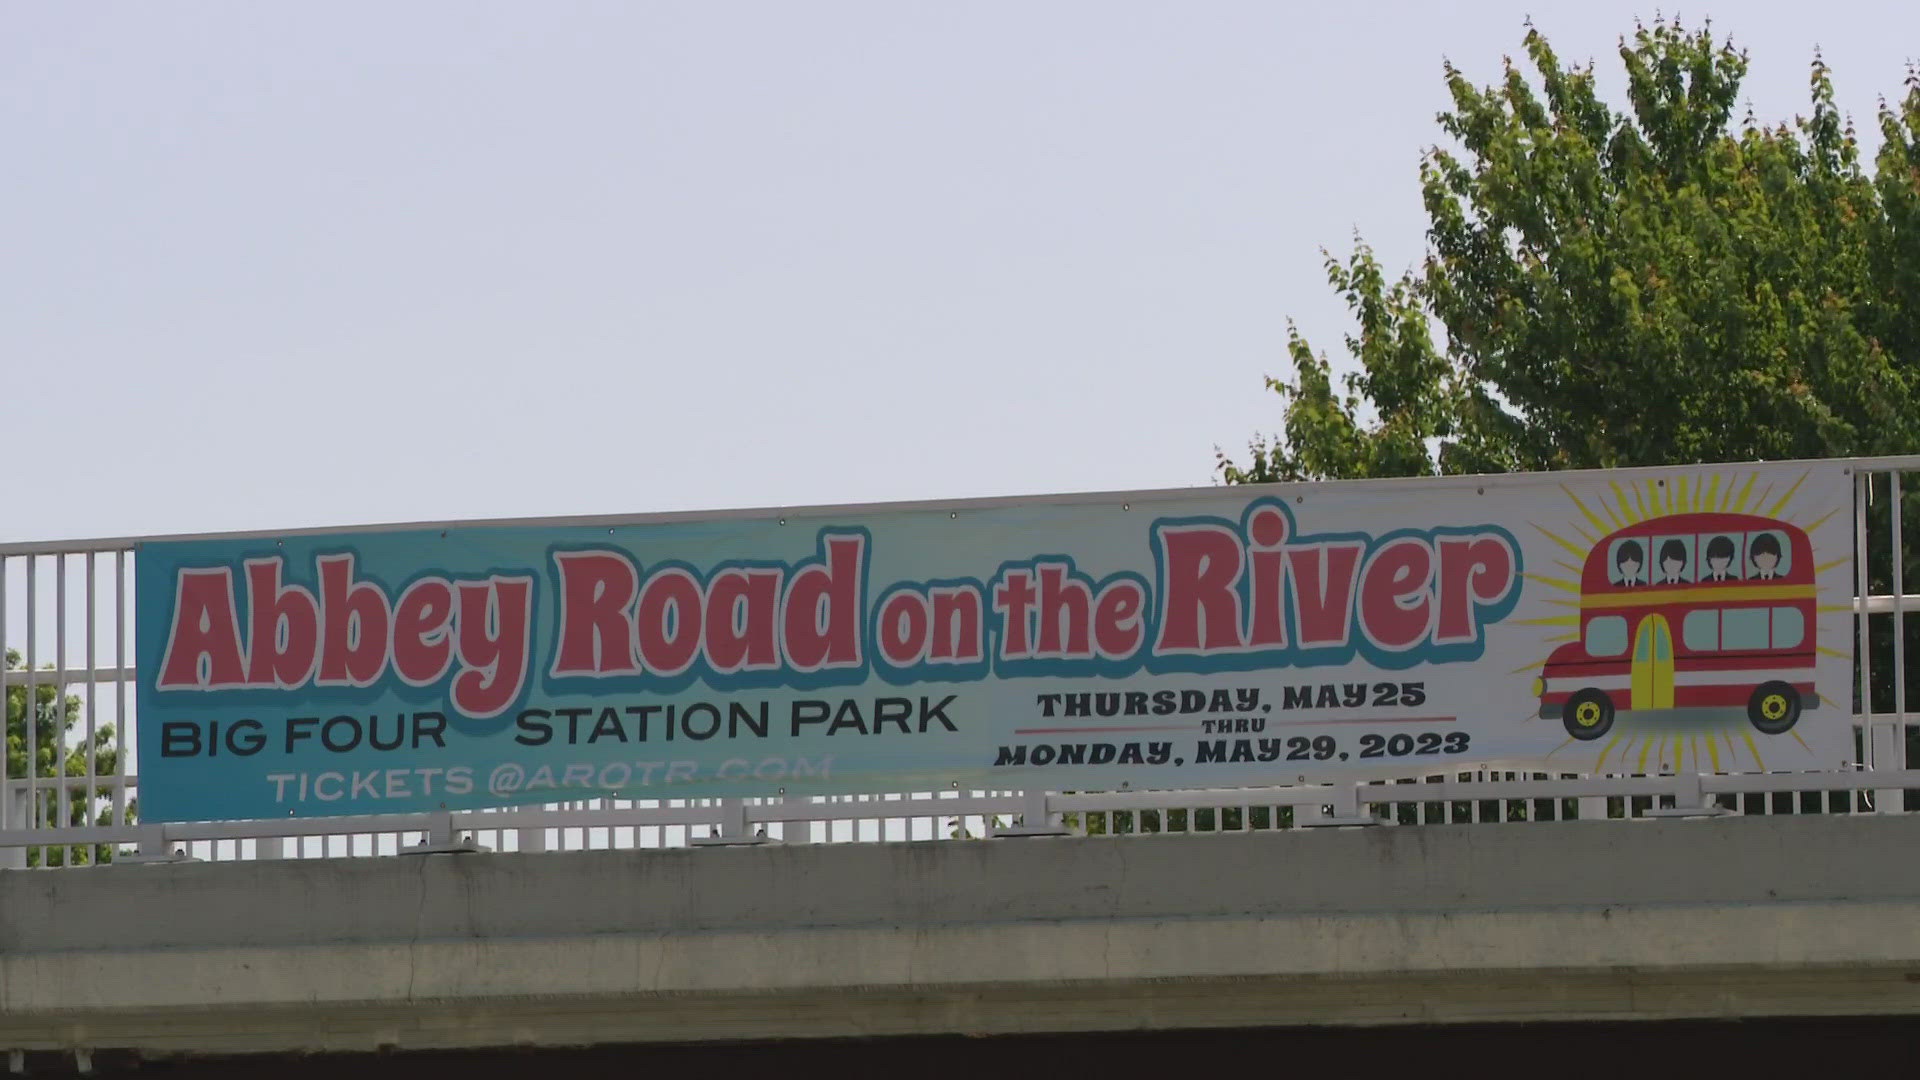 Abbey Road on the River will include more than 200 Beatles and 60's themed concerts over four days.